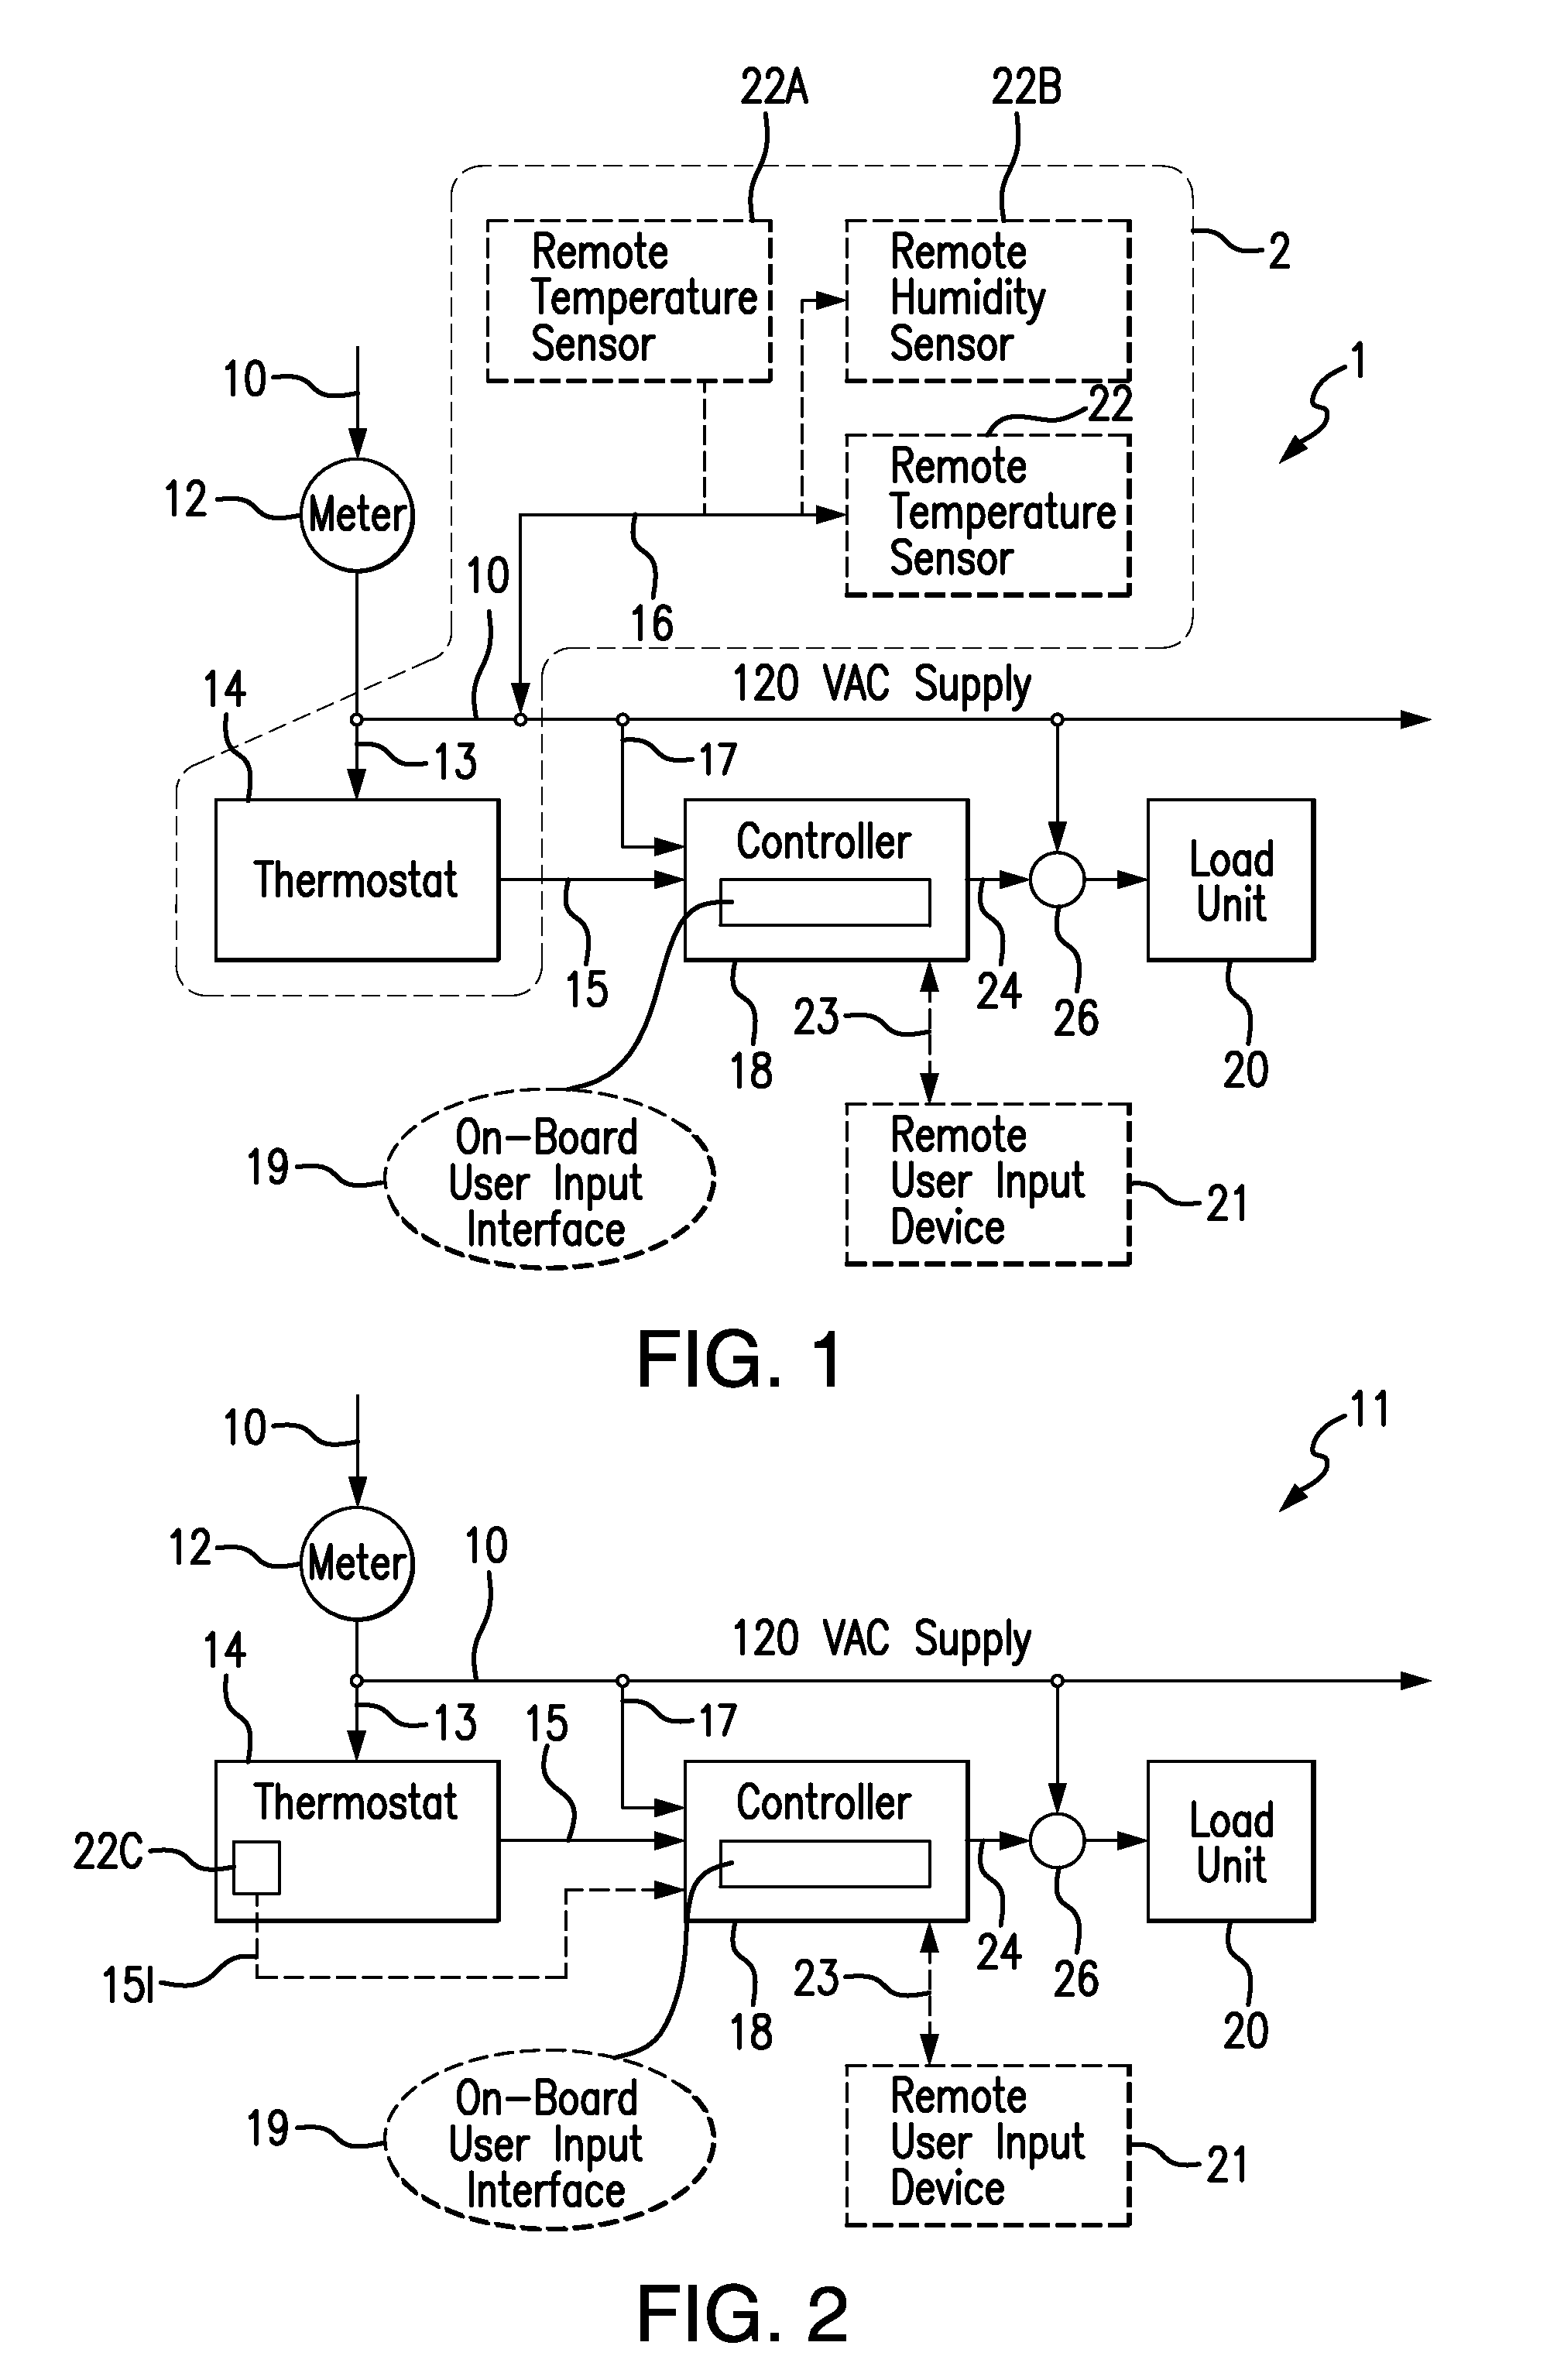 Controller For Automatic Control And Optimization Of Duty Cycled HVAC&R Equipment, And Systems And Methods Using Same